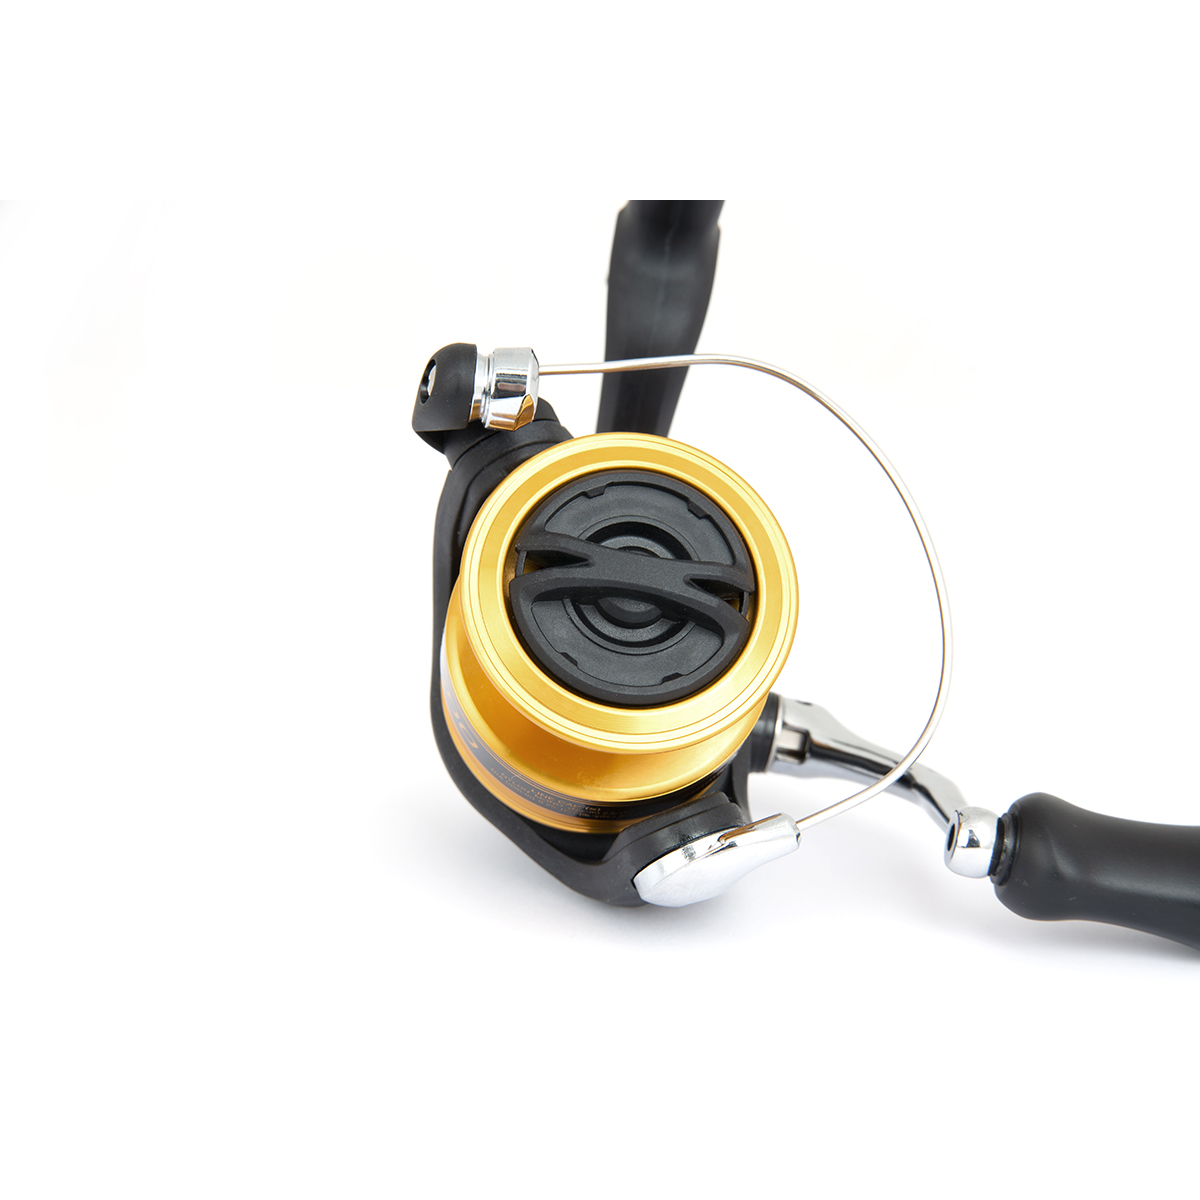 Shimano FX FC Match Fishing Reels All Sizes